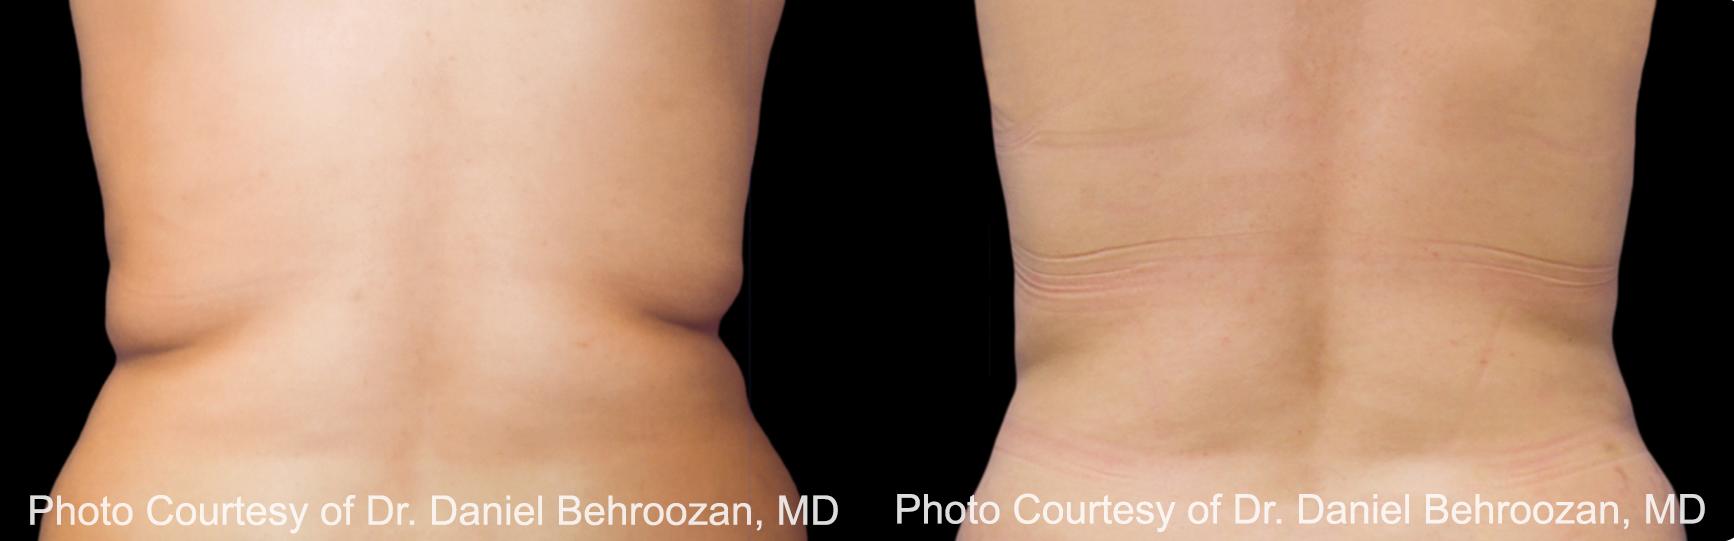  before and after pictures in , , The Difference Between Traditional Weight Loss and CoolSculpting